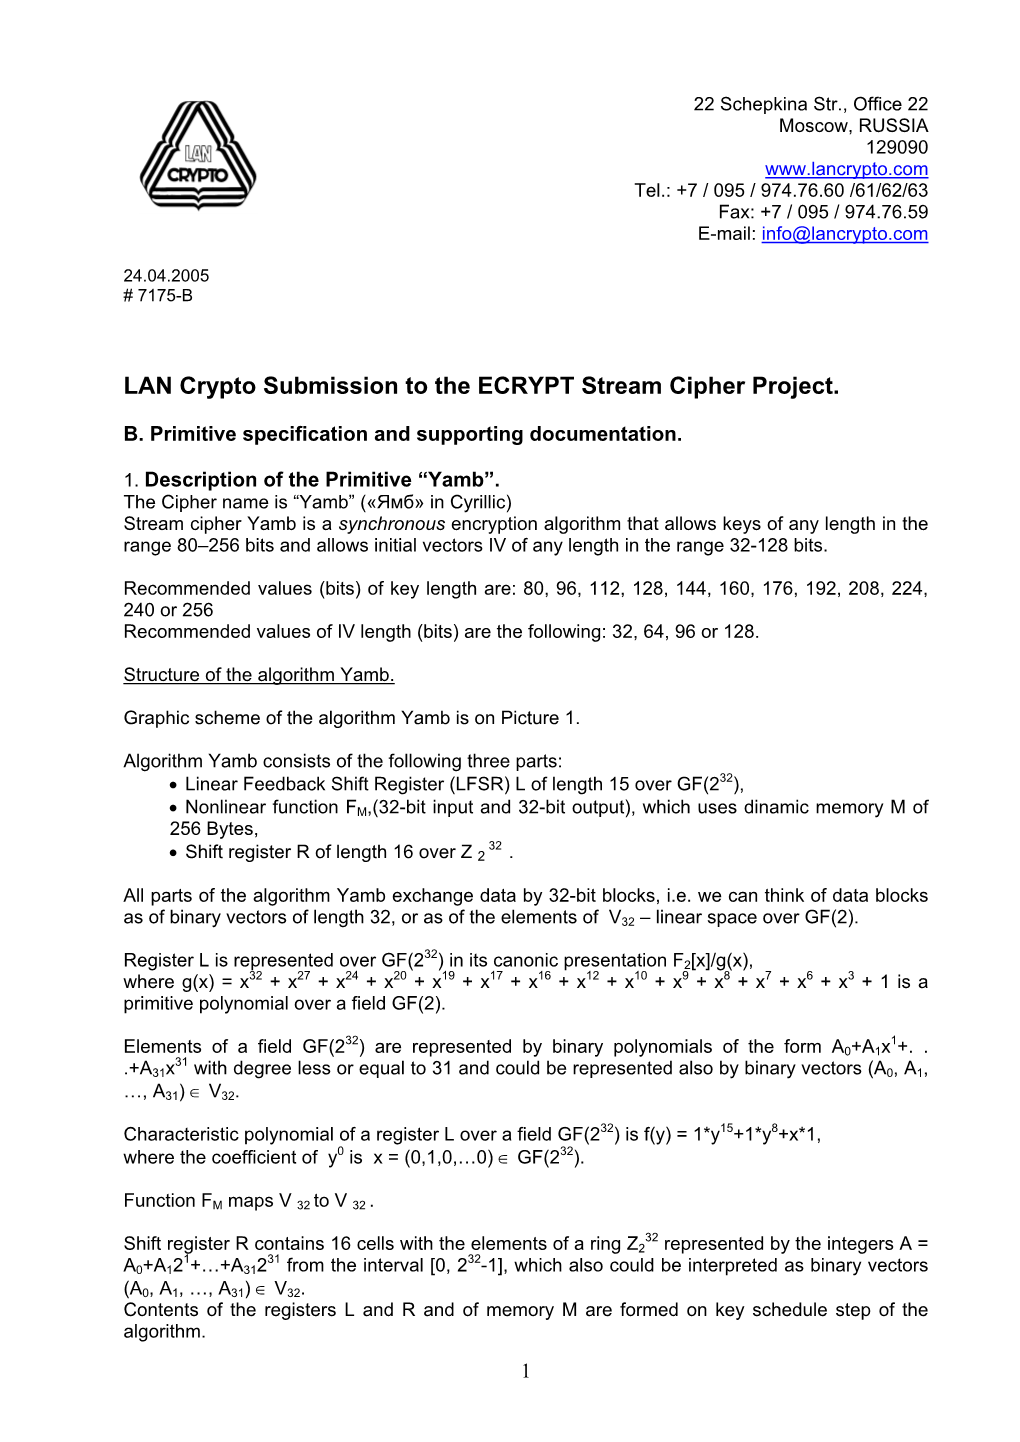 LAN Crypto Submission to the ECRYPT Stream Cipher Project